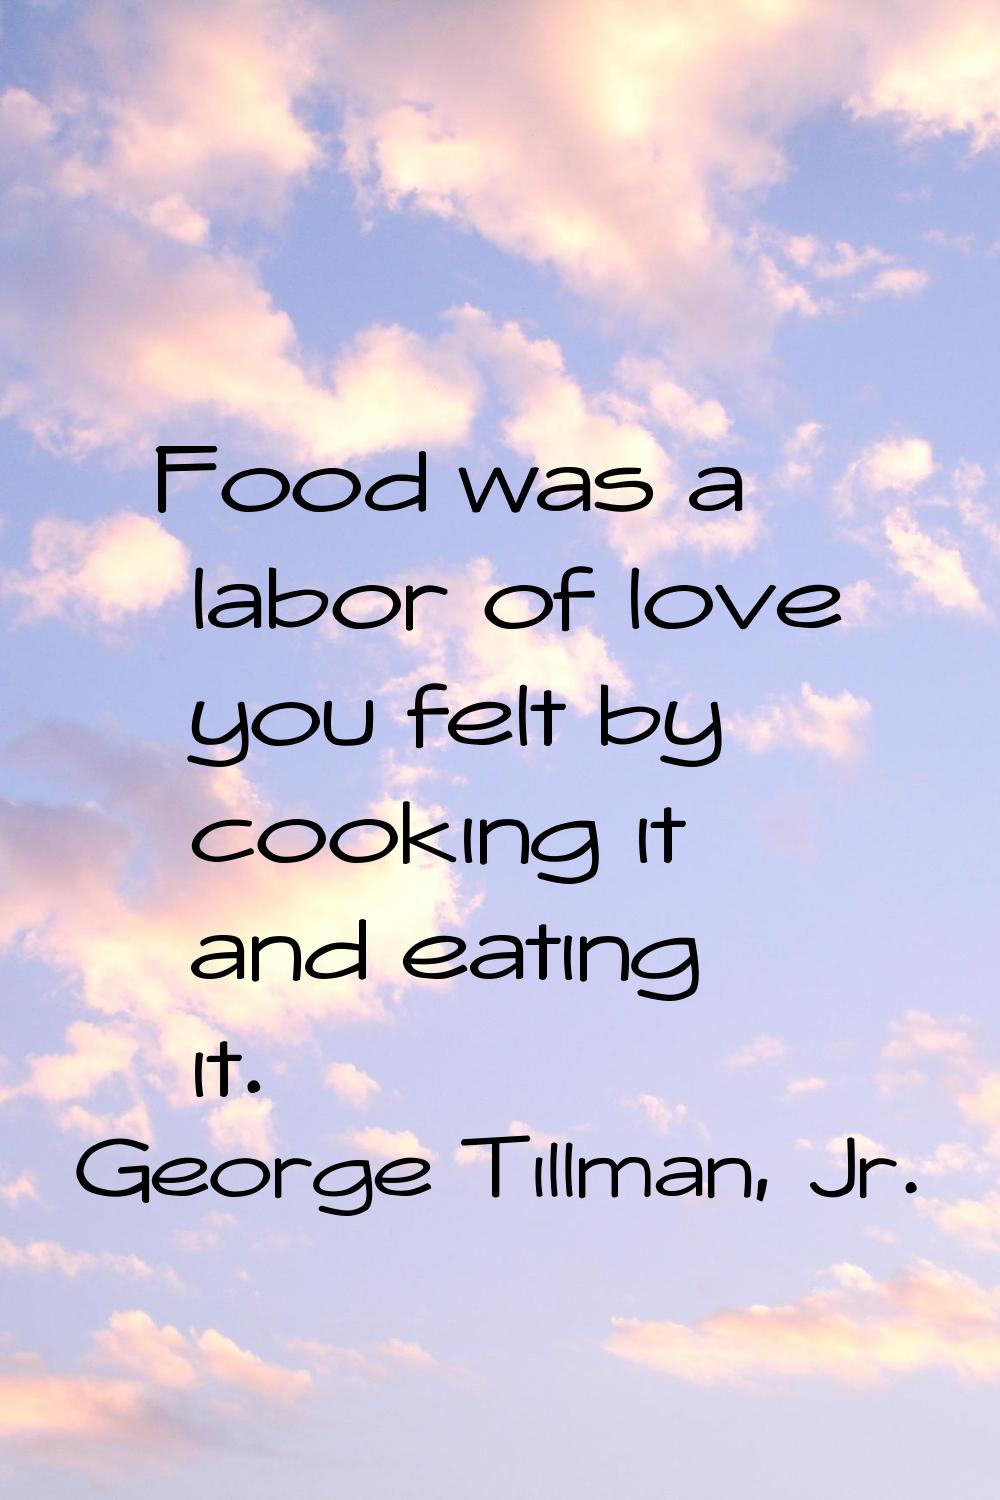 Food was a labor of love you felt by cooking it and eating it.